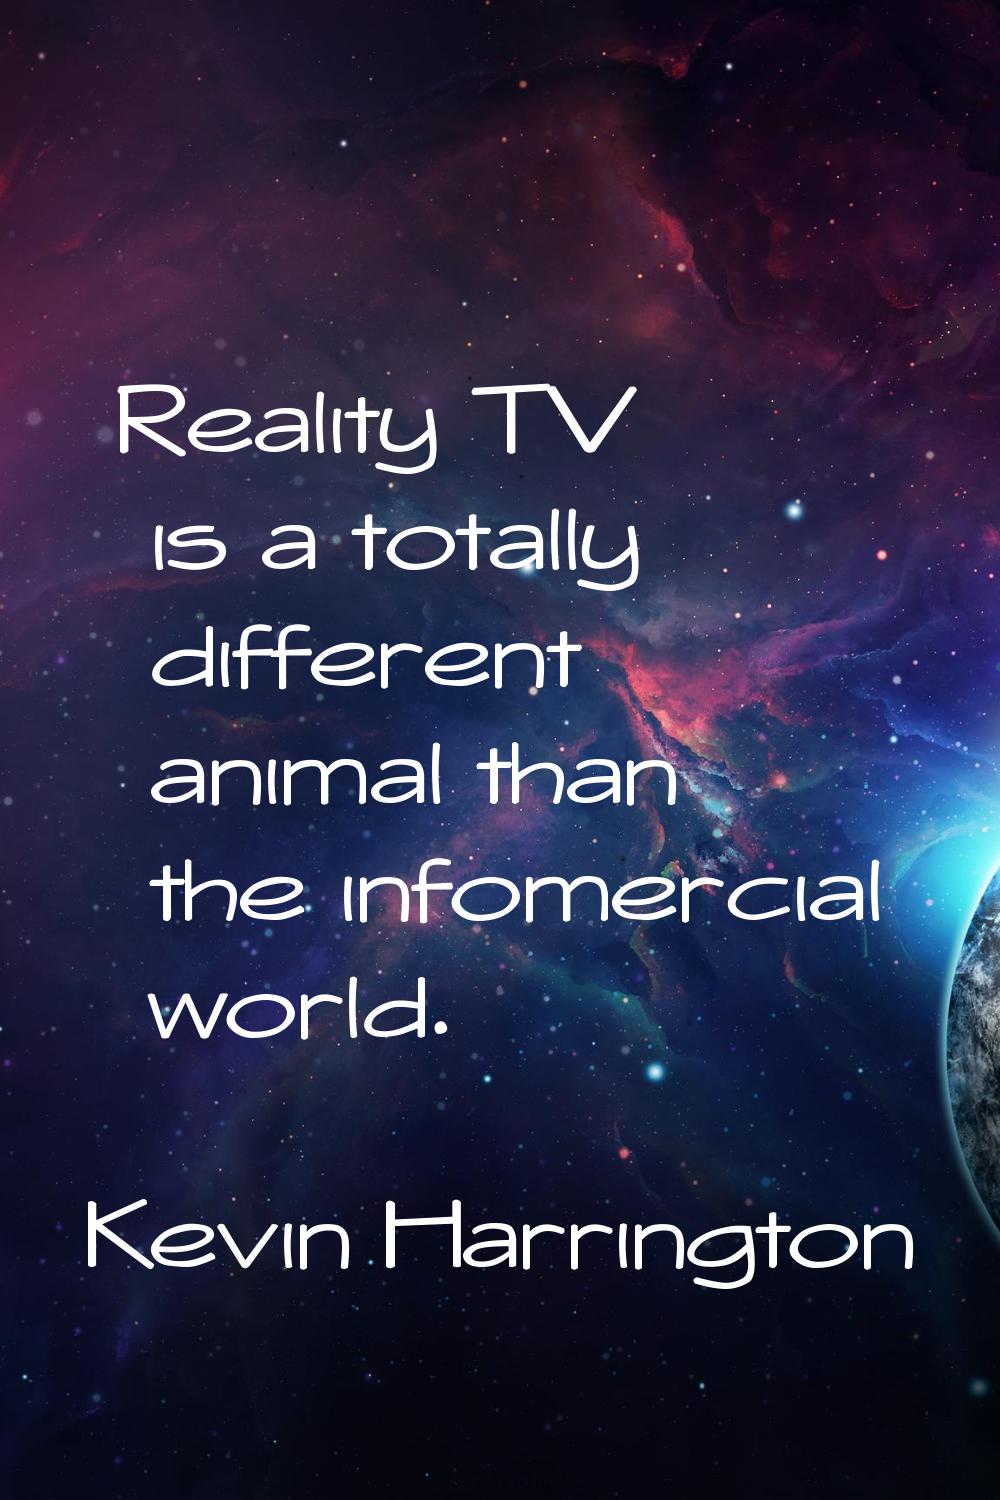 Reality TV is a totally different animal than the infomercial world.